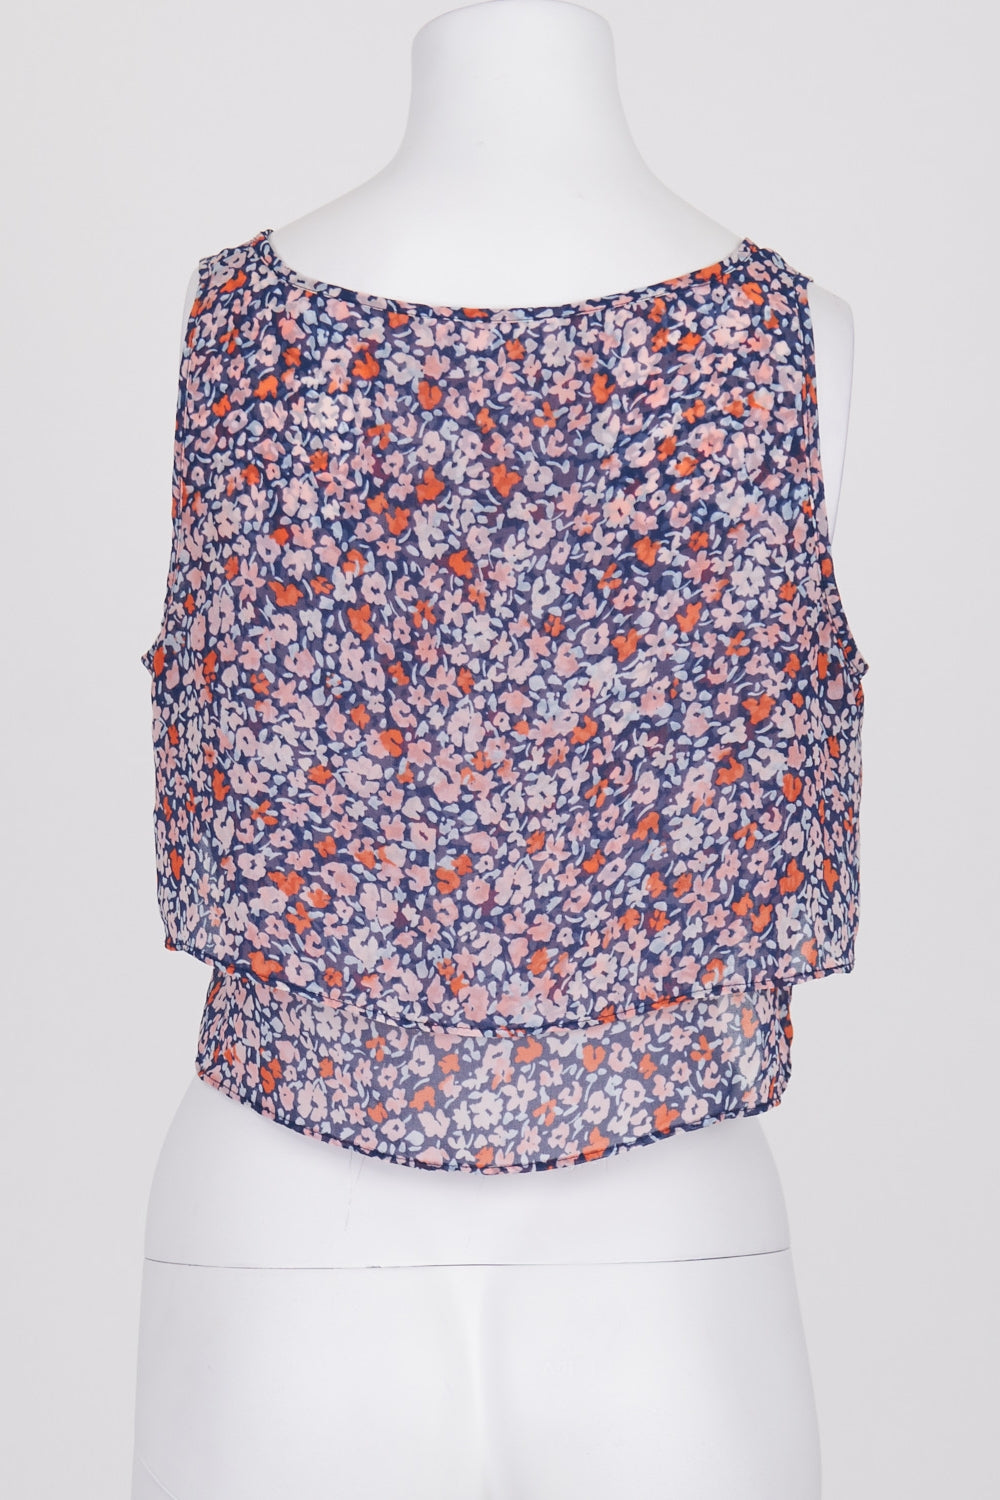 BCBGENERATION Floral Cropped Top S